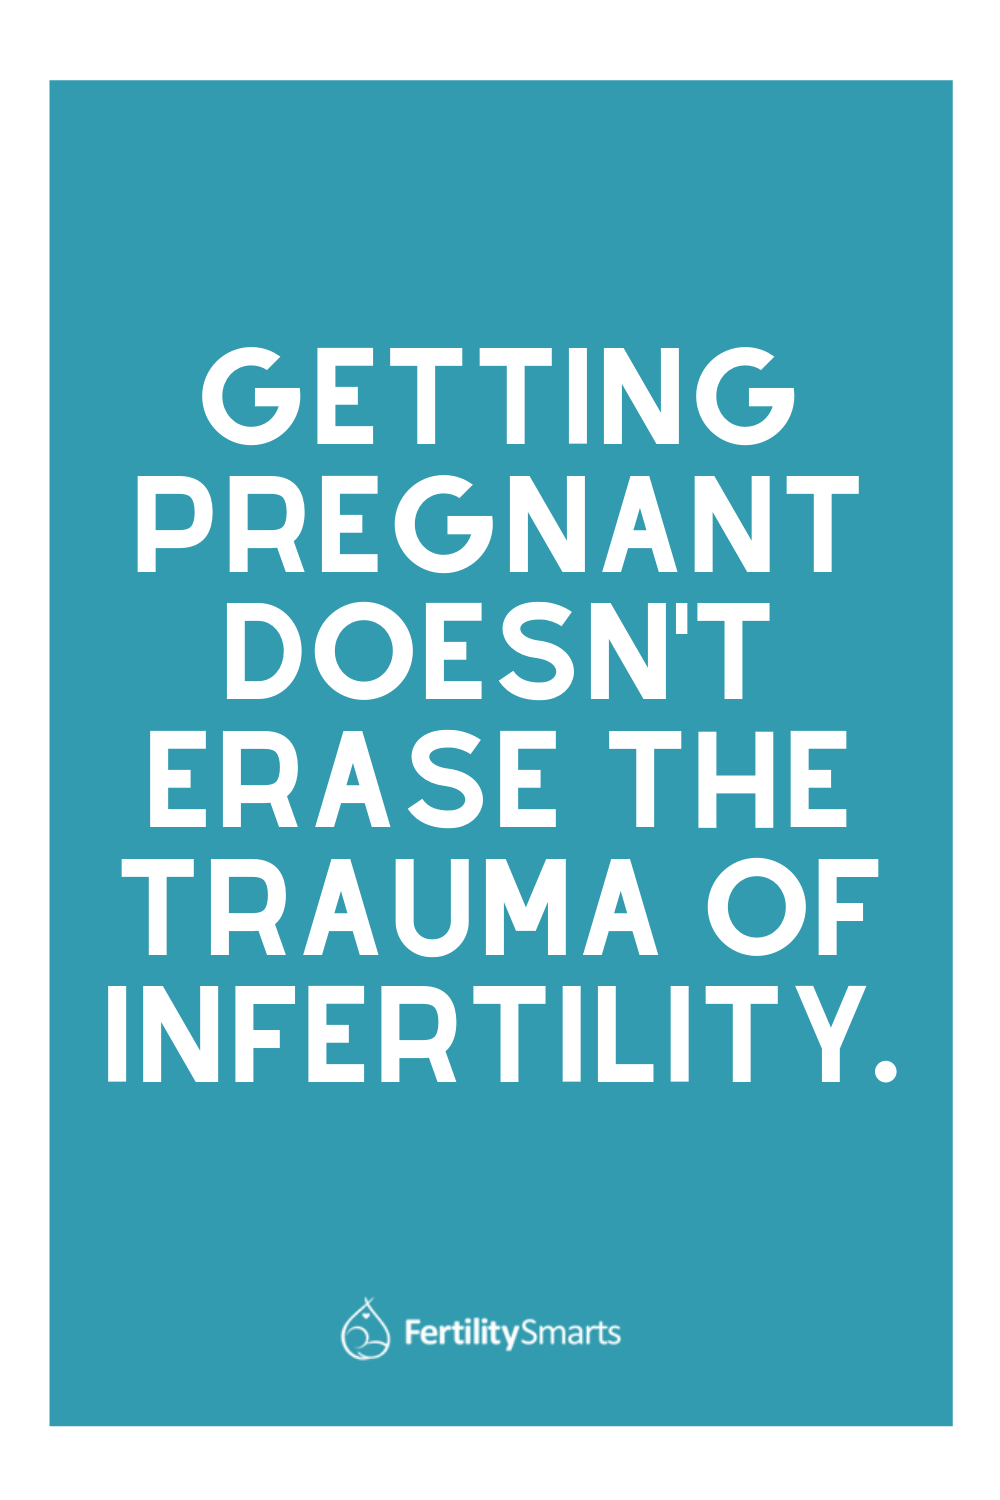 Getting Pregnant Doesn't Erase The Trauma of Infertility